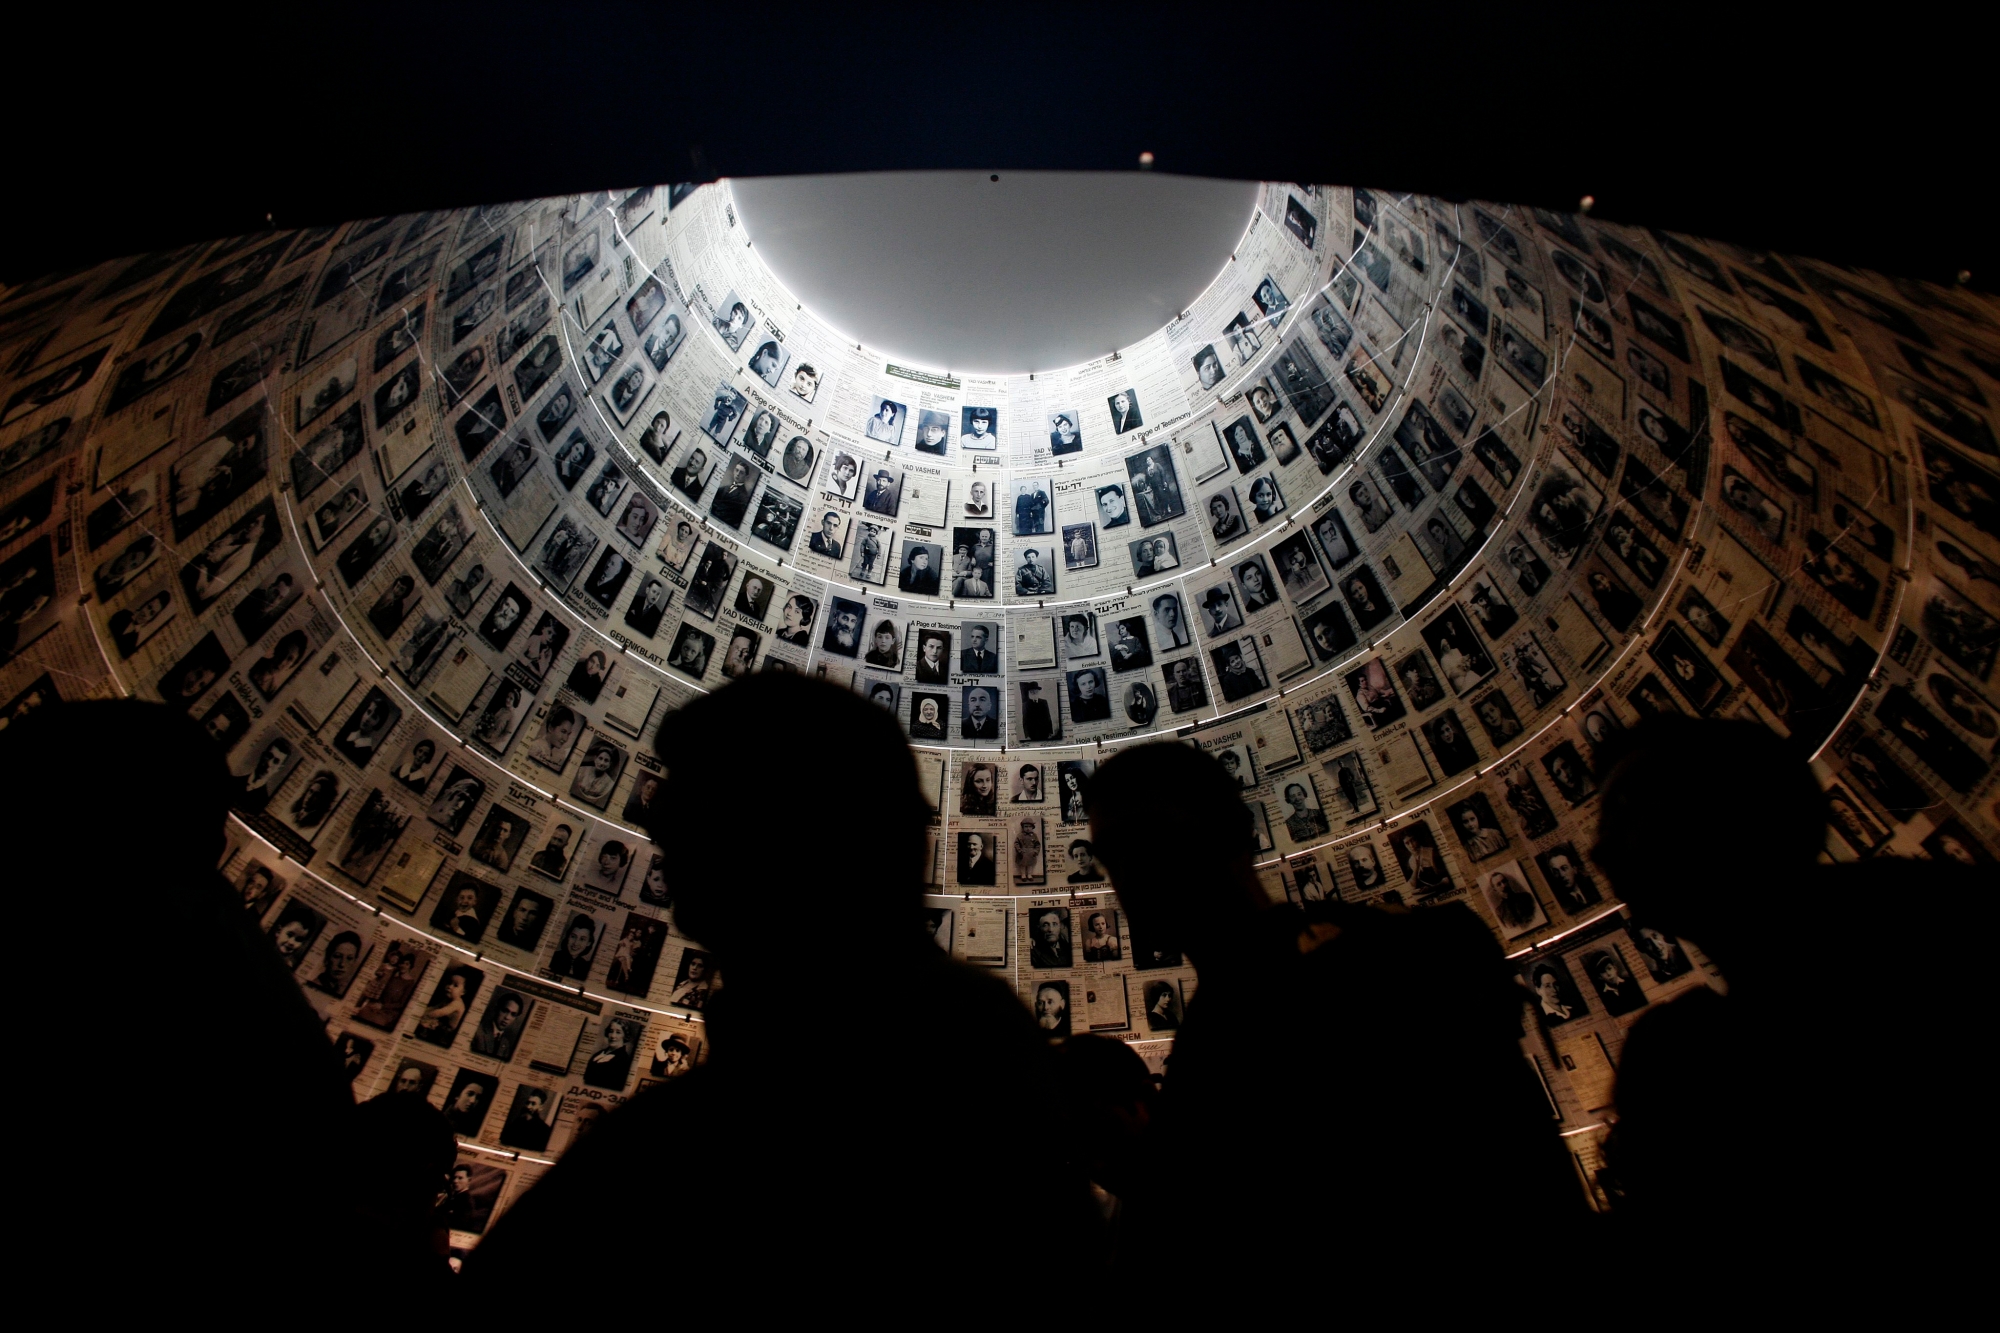 epa02551742 Visitors view the Hall of Names in the Yad Vashem Holocaust memorial in Jerusalem, on the International Holocaust Remembrance Day, on 27 January 2011. The International Holocaust Remembrance Day, commemorates the Jewish people that perished under the Nazi regime. Germany's parliament on Thursday mourned the victims of the Holocaust, with its speaker Norbert Lammert saying the horrors perpetrated by Nazi Germany must never be forgotten.  EPA/OLIVER WEIKEN MIDEAST ISRAEL HOLOCAUST REMEMBRANCE DAY